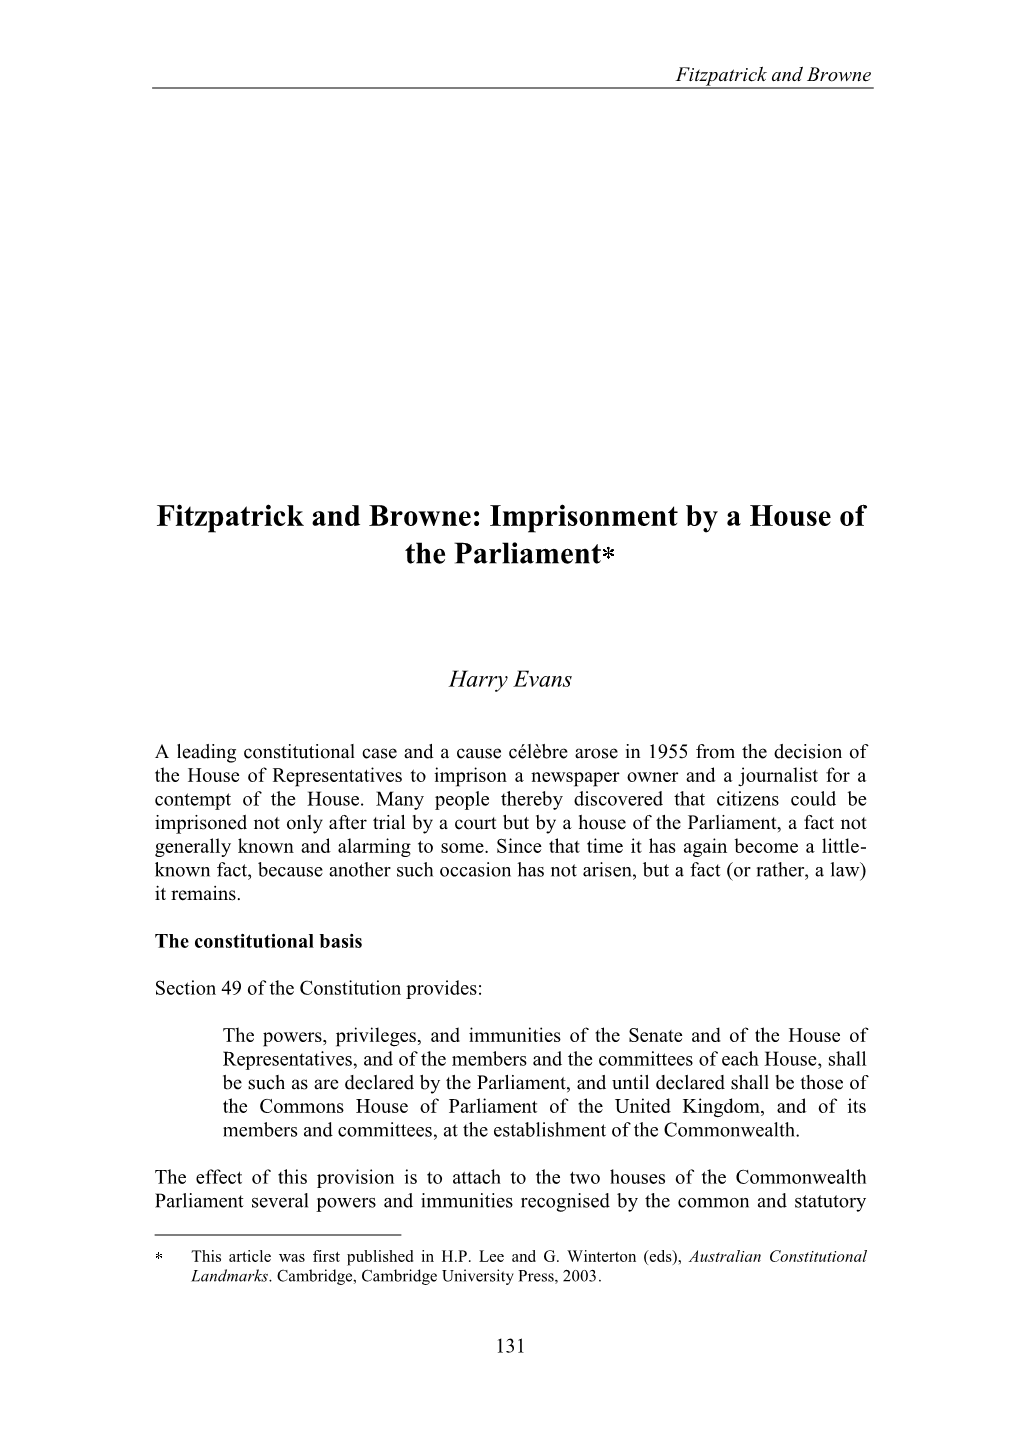 Papers on Parliament: Harry Evans: Selected